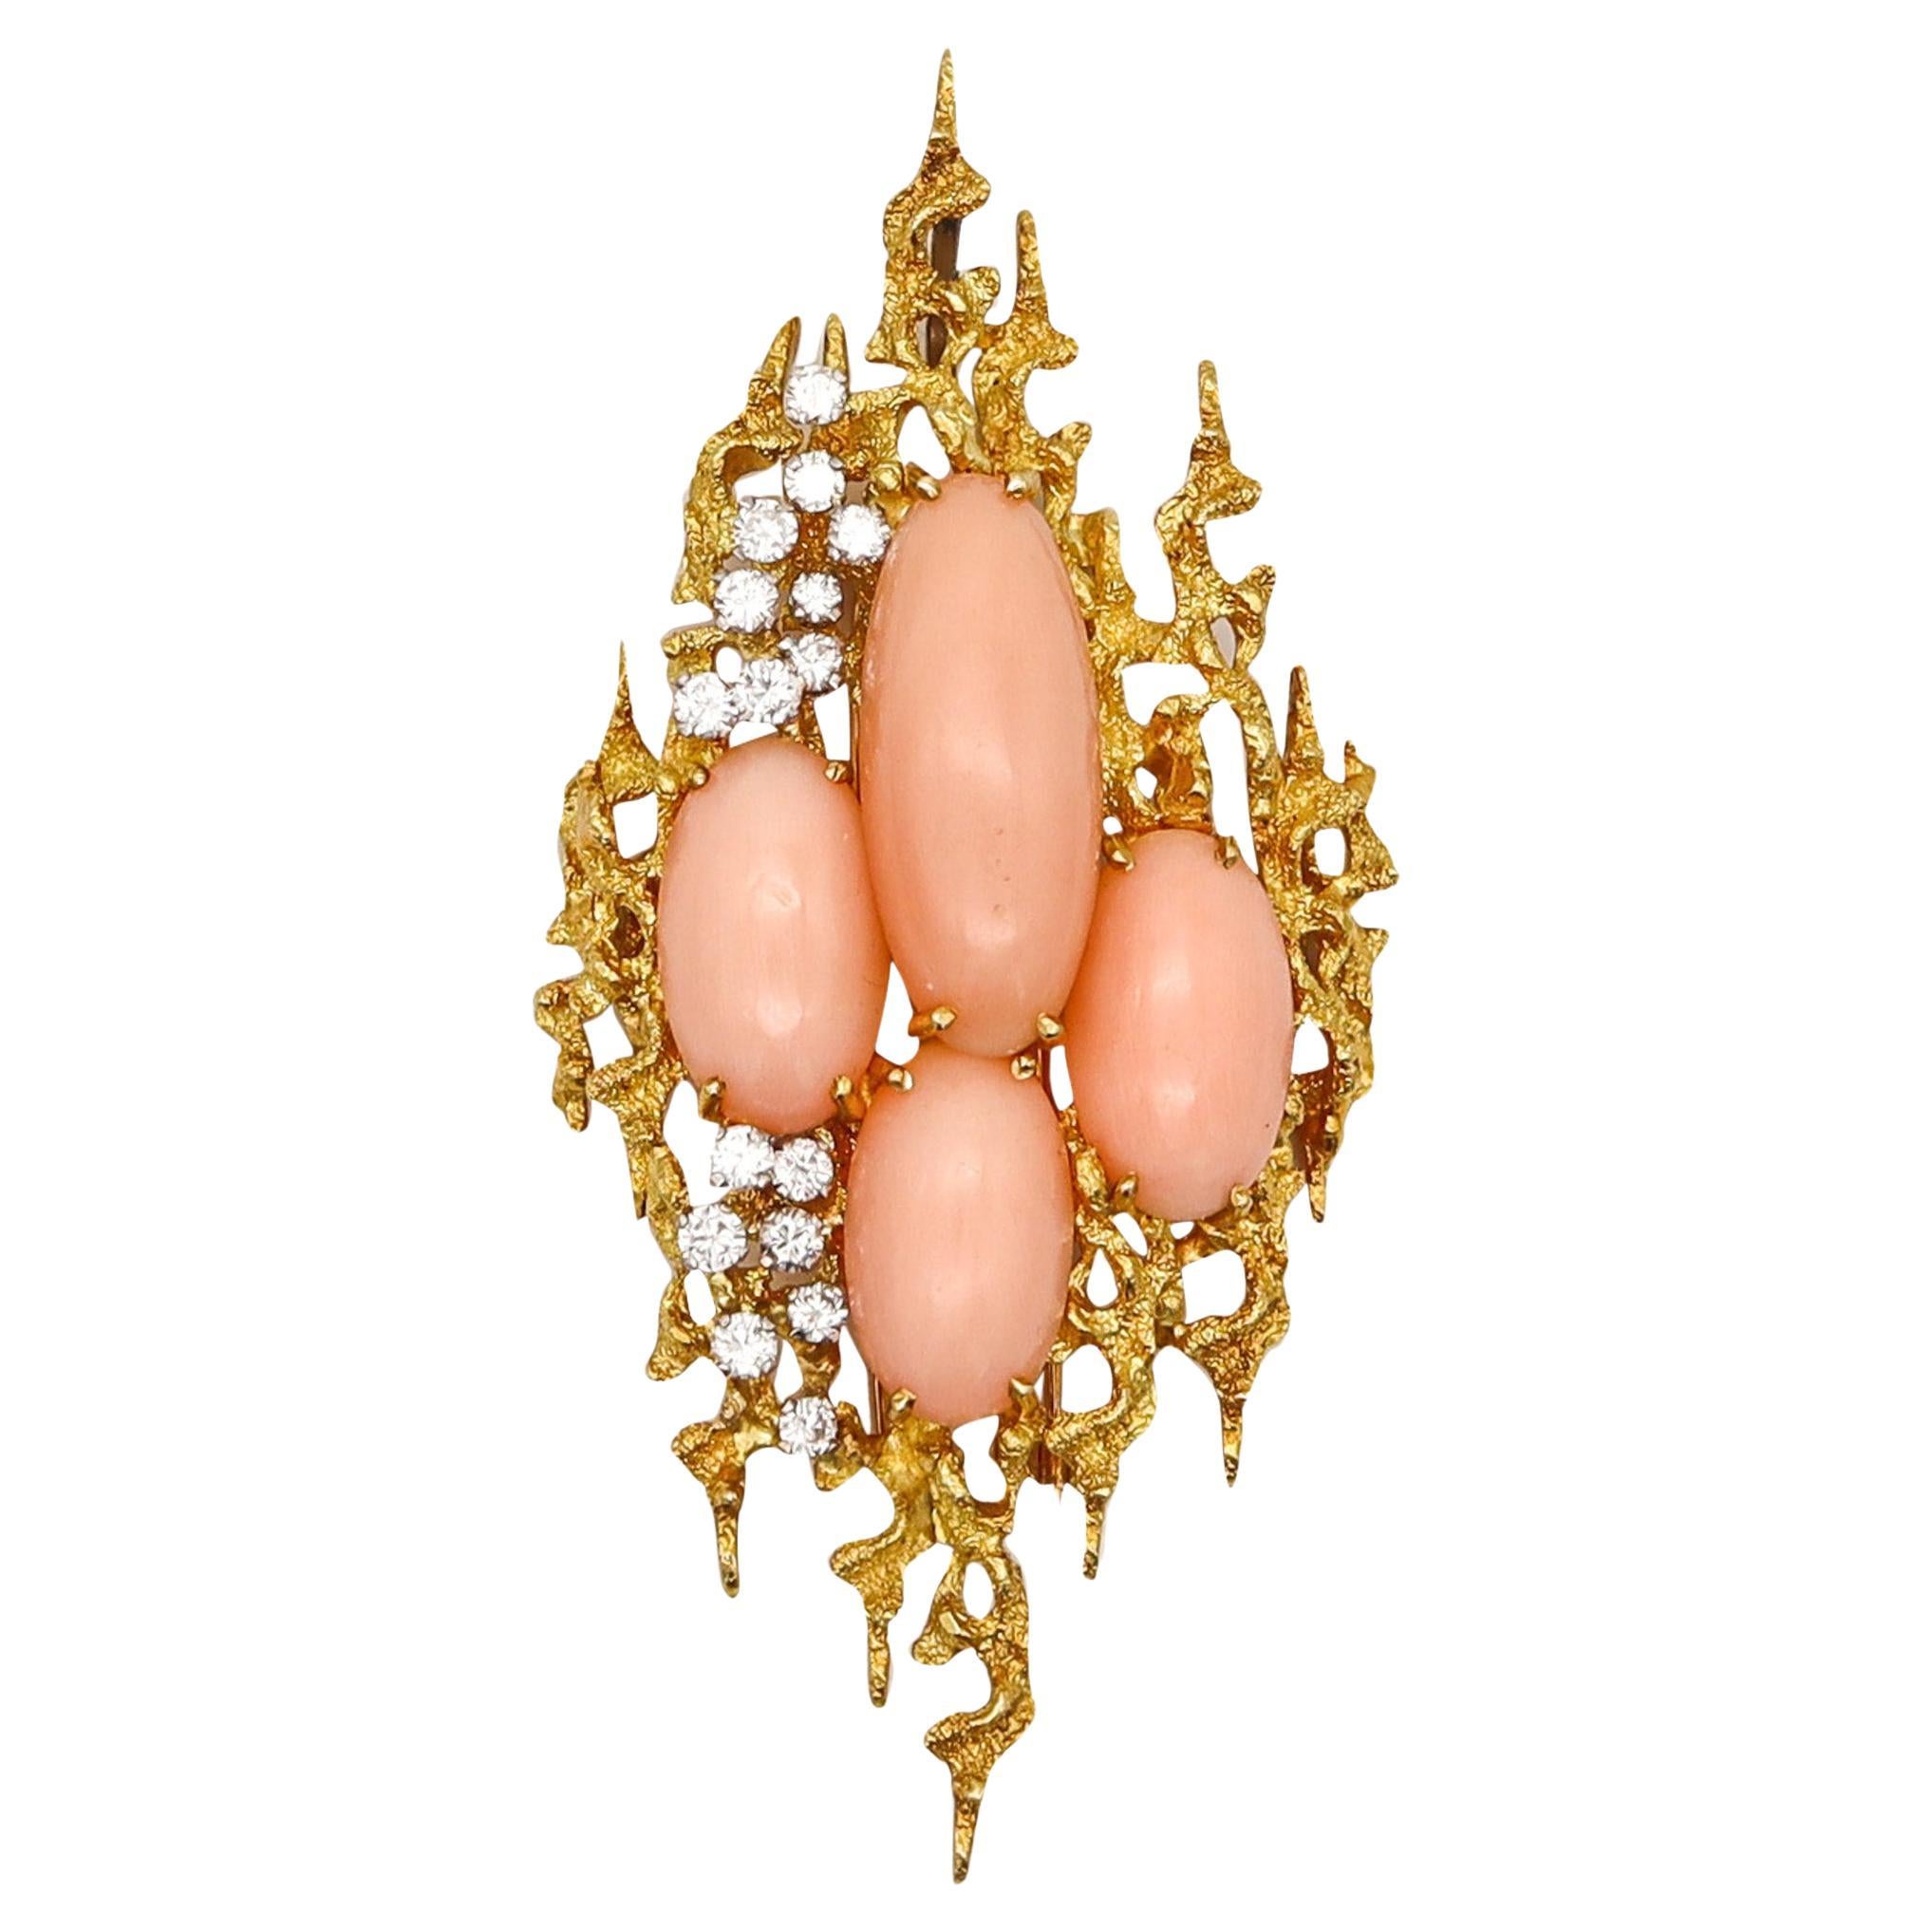 George Weil 1960 Brutalist Pendant Brooch In 18Kt Gold Diamonds And Corals For Sale